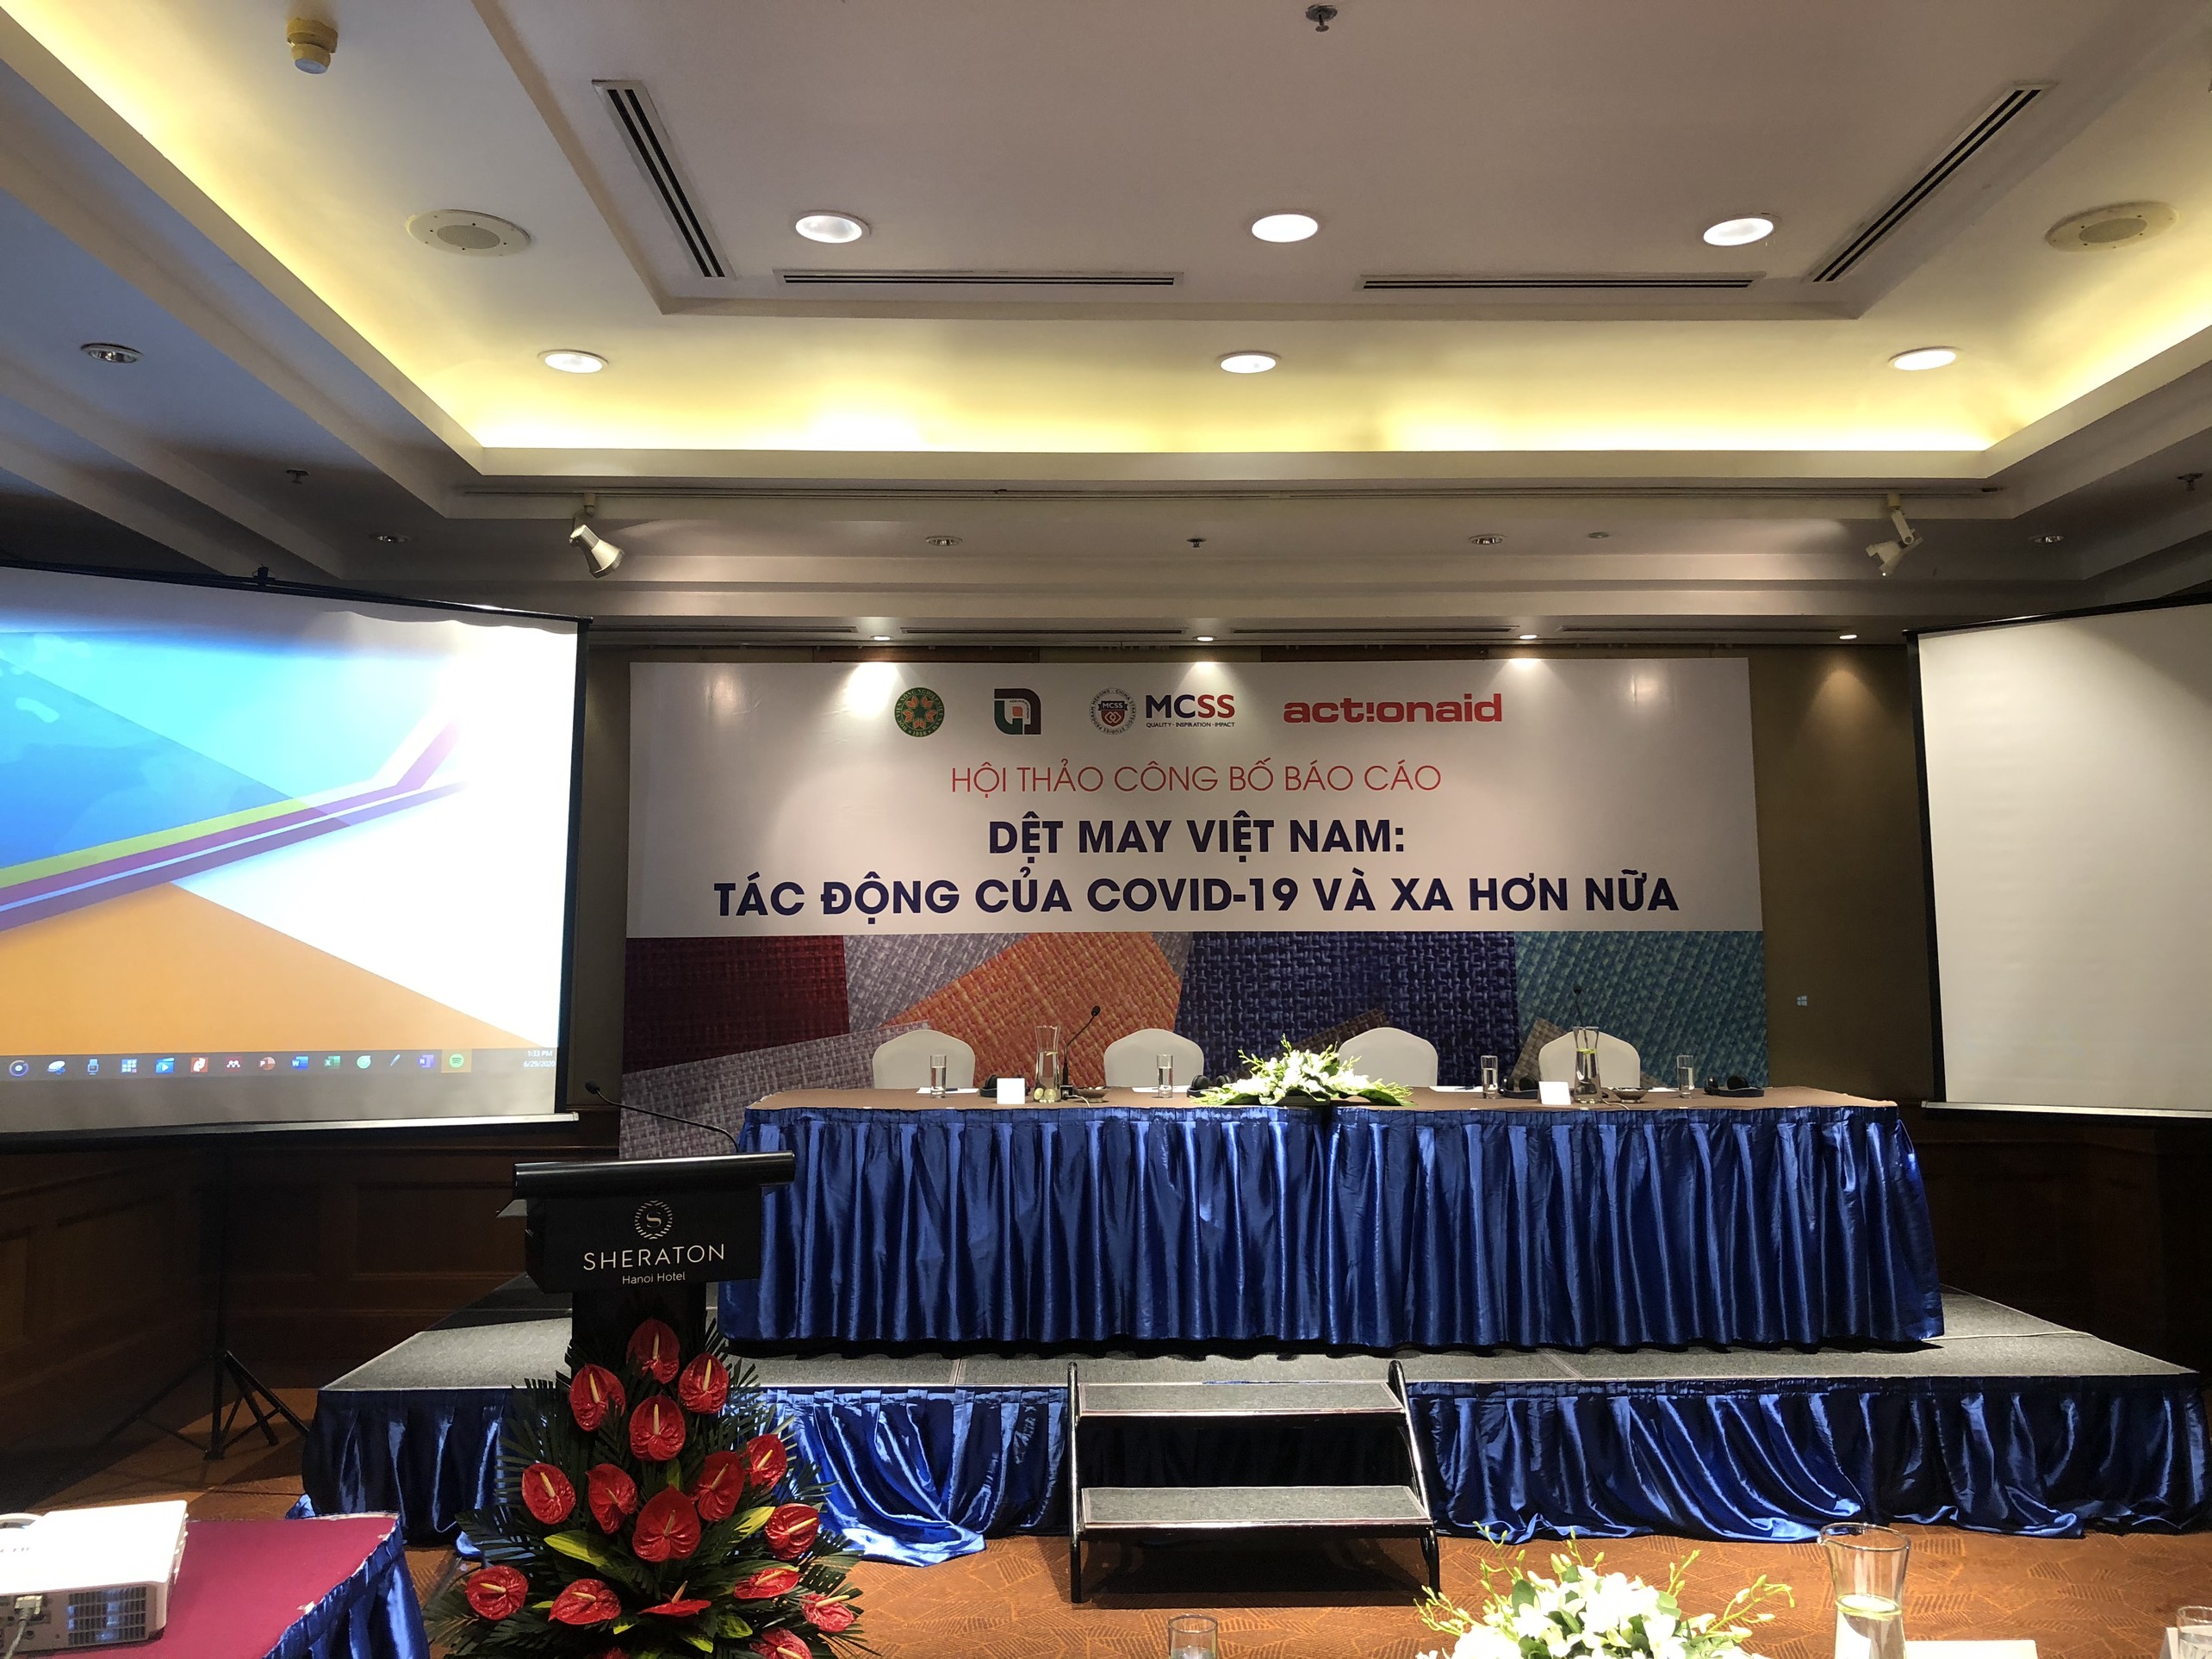 Vietnam Textile: Impact of COVID-19 and beyond